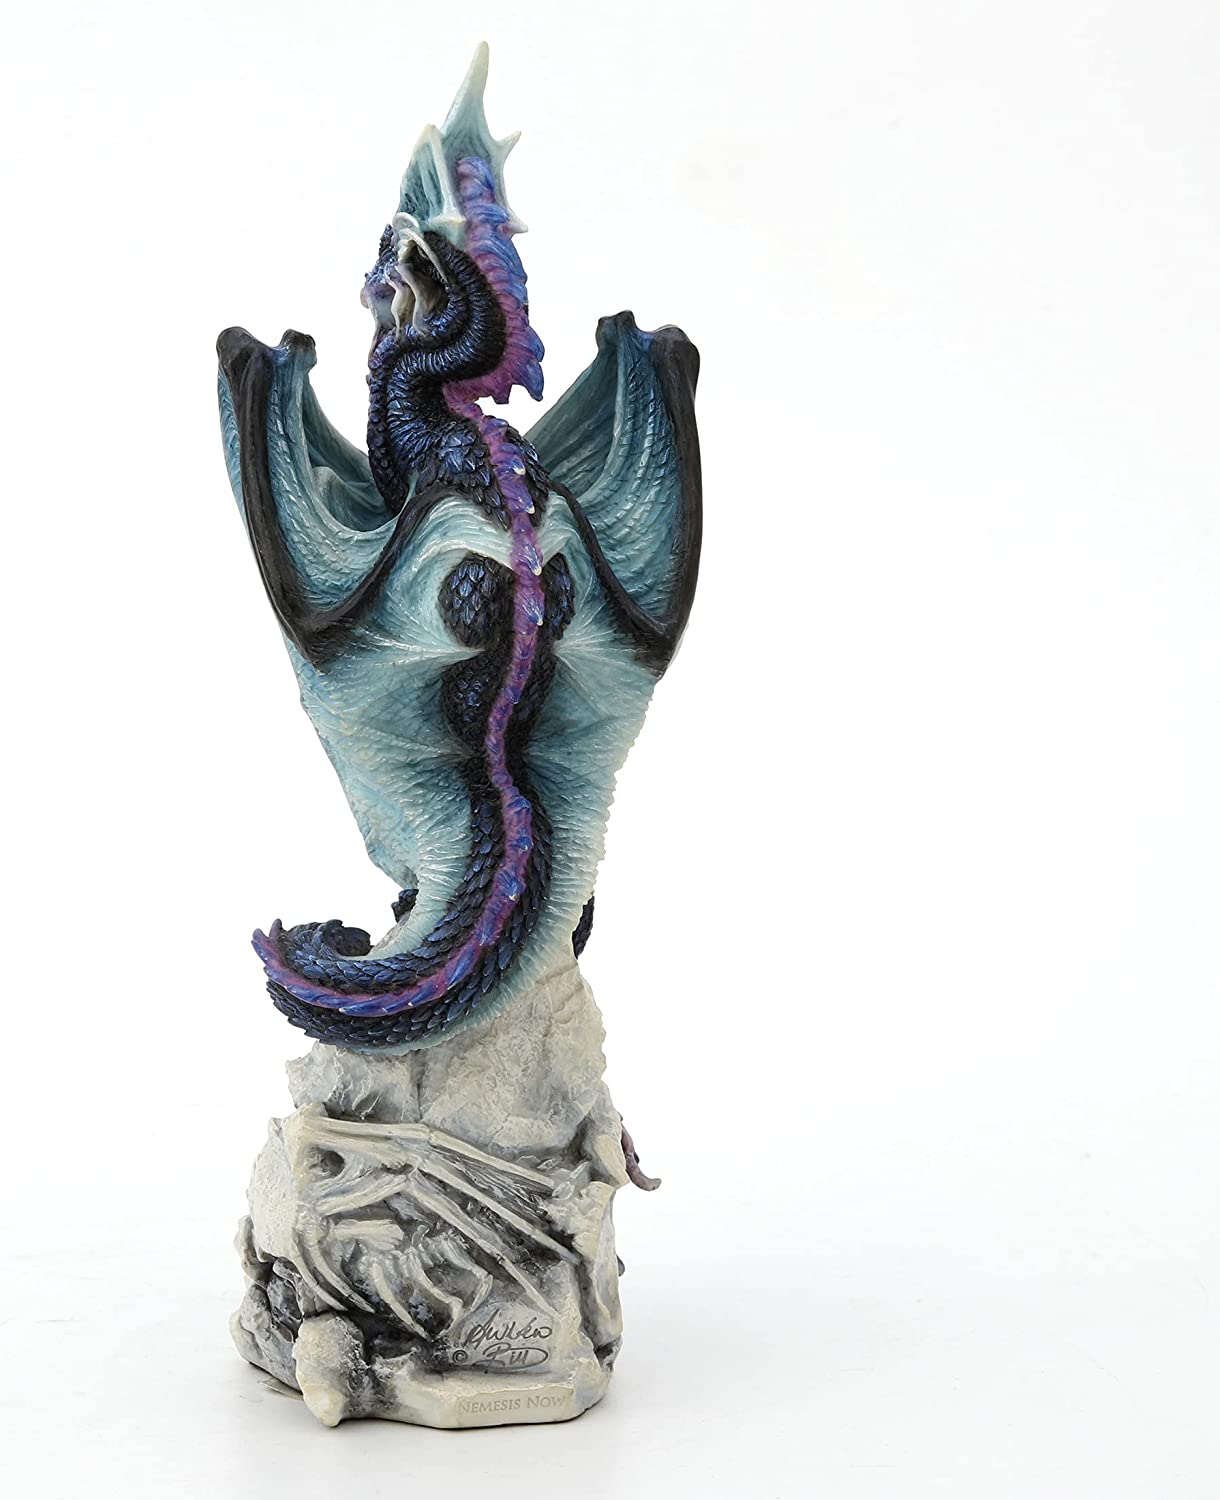 Dread Defender by Andrew Bill, Figurine